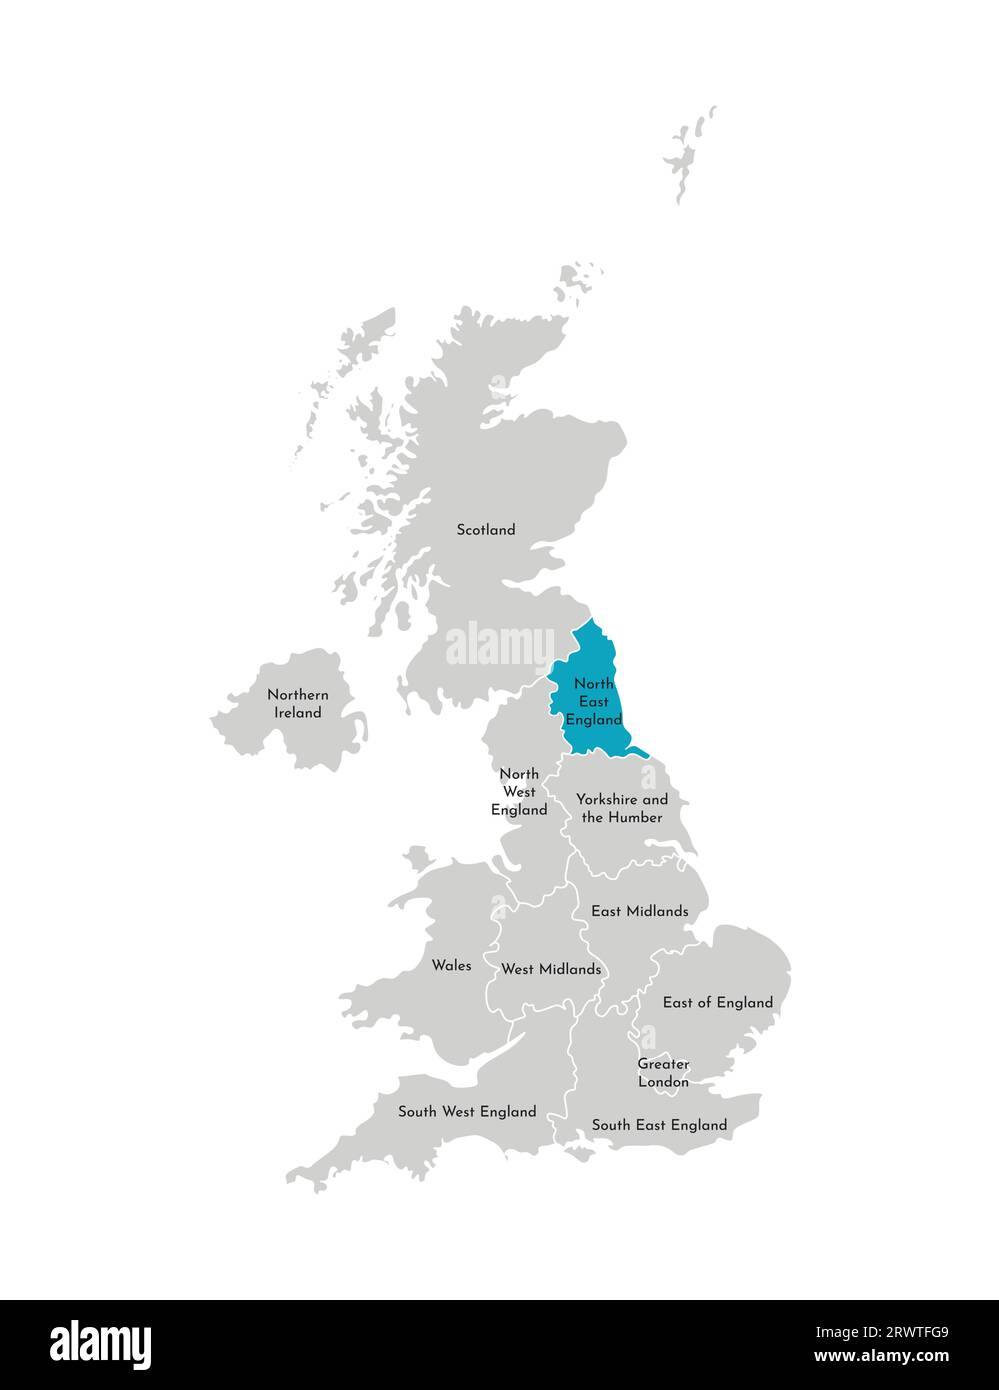 Vector isolated illustration of simplified administrative map of the United Kingdom (UK). Blue shape of North East England. Borders and names of the r Stock Vector